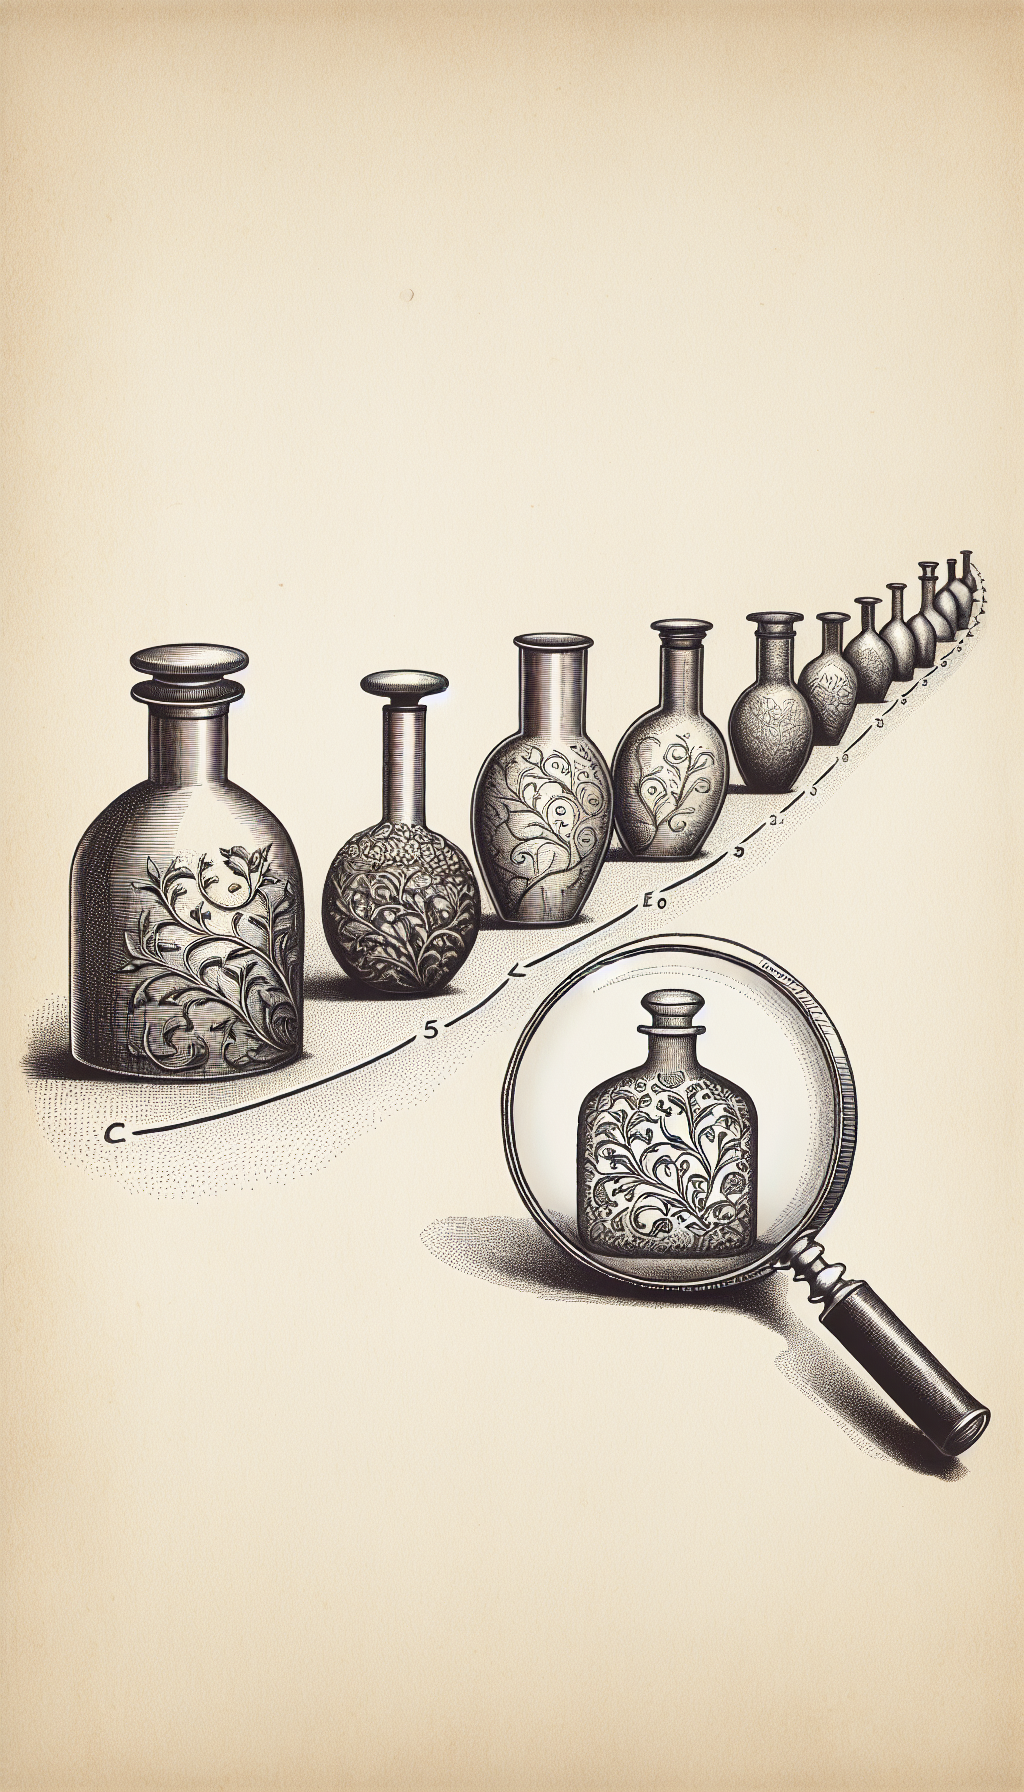 An illustration displays a timeline transitioning from crude, utilitarian powder flasks to ornate artistic ones. Halfway along, a magnifying glass hovers, revealing maker's marks and age indicators in its lens, symbolizing identification. The flasks under the glass exhibit a detailed etching style, contrasting with the simpler outlines of earlier and later designs, subtly showcasing their evolution.